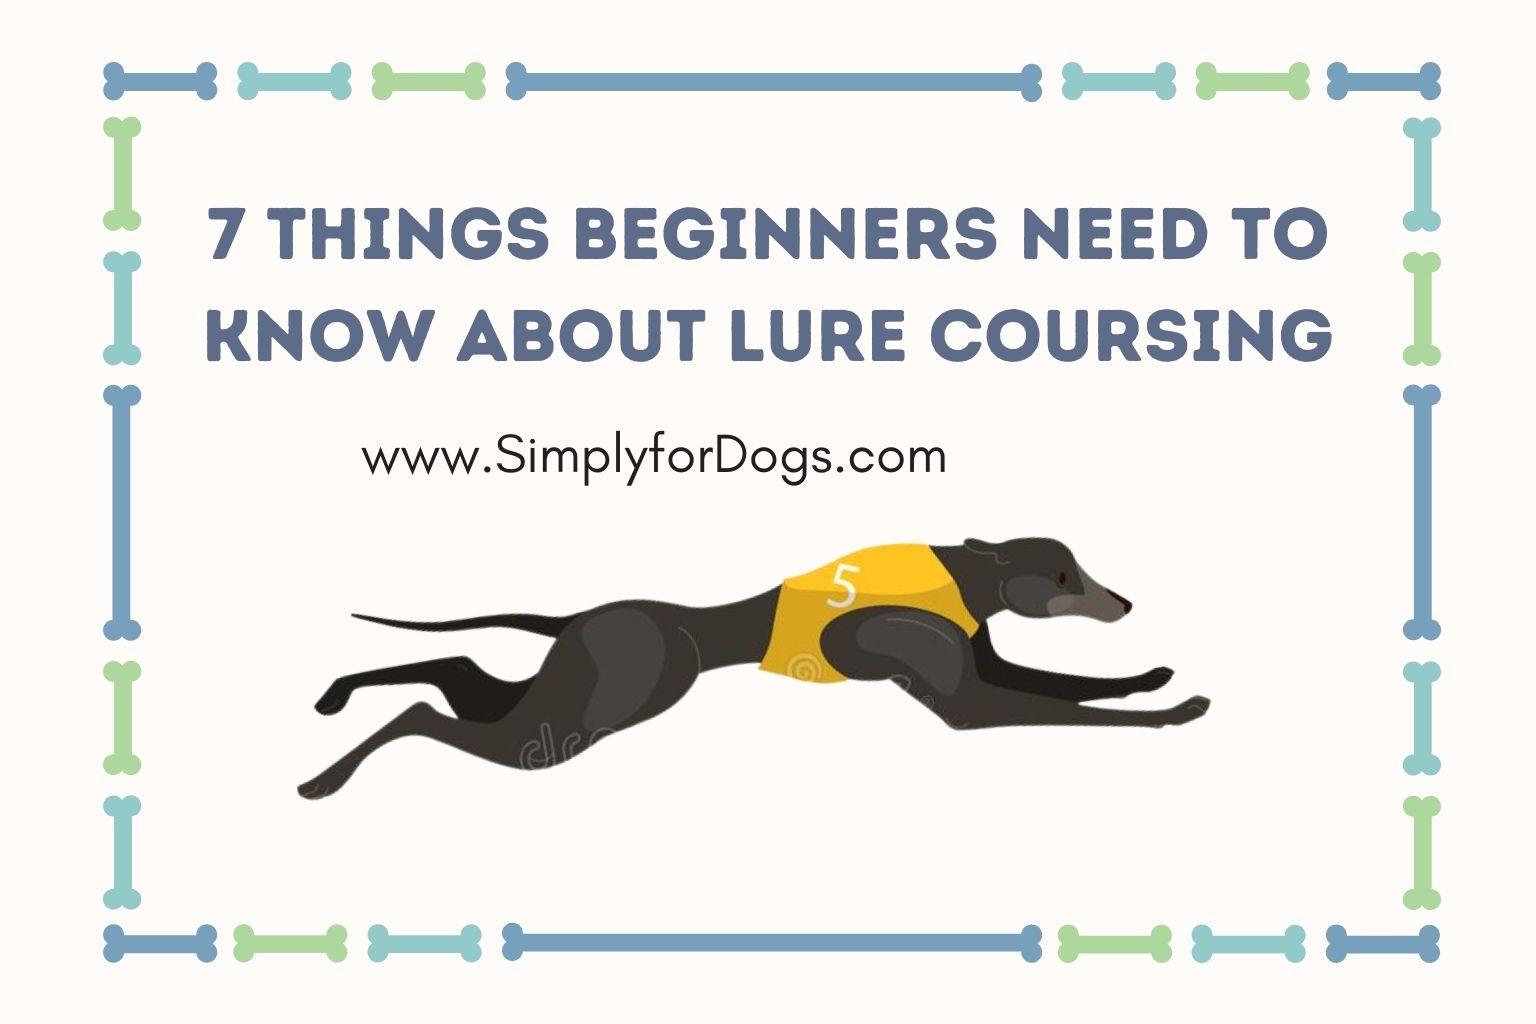 https://simplyfordogs.com/wp-content/uploads/2017/09/7-Things-Beginners-Need-to-Know-About-Lure-Coursing.jpg